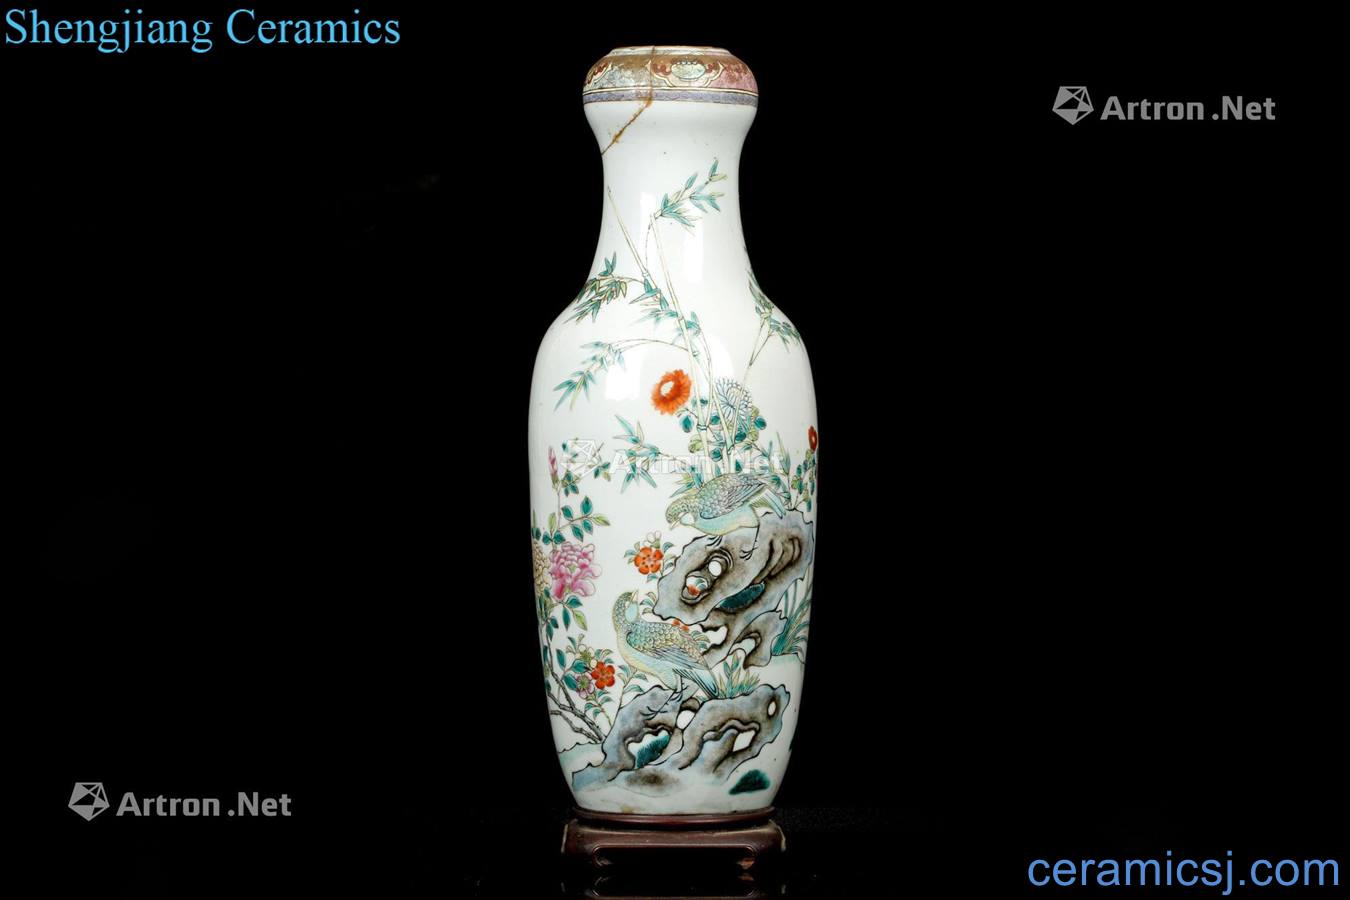 The late qing dynasty painting of flowers and pastel garlic bottles